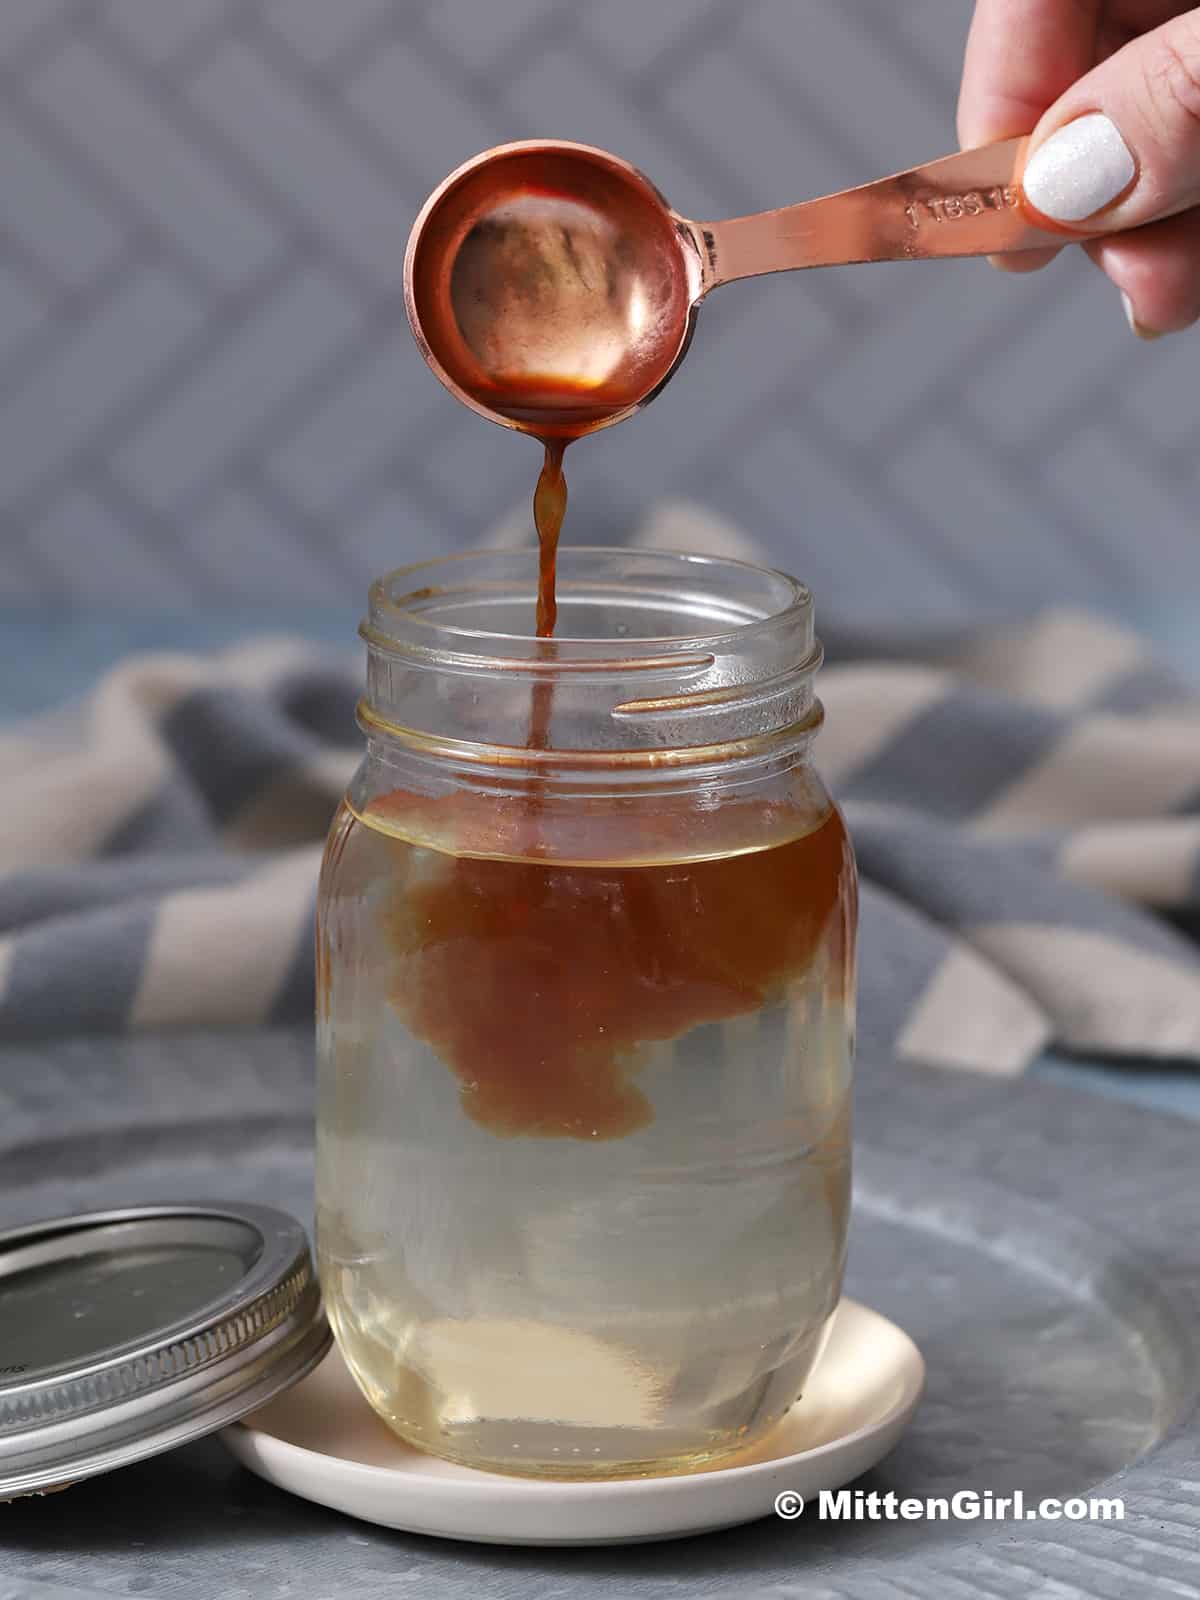 Vanilla extract being poured into a jar of syrup.